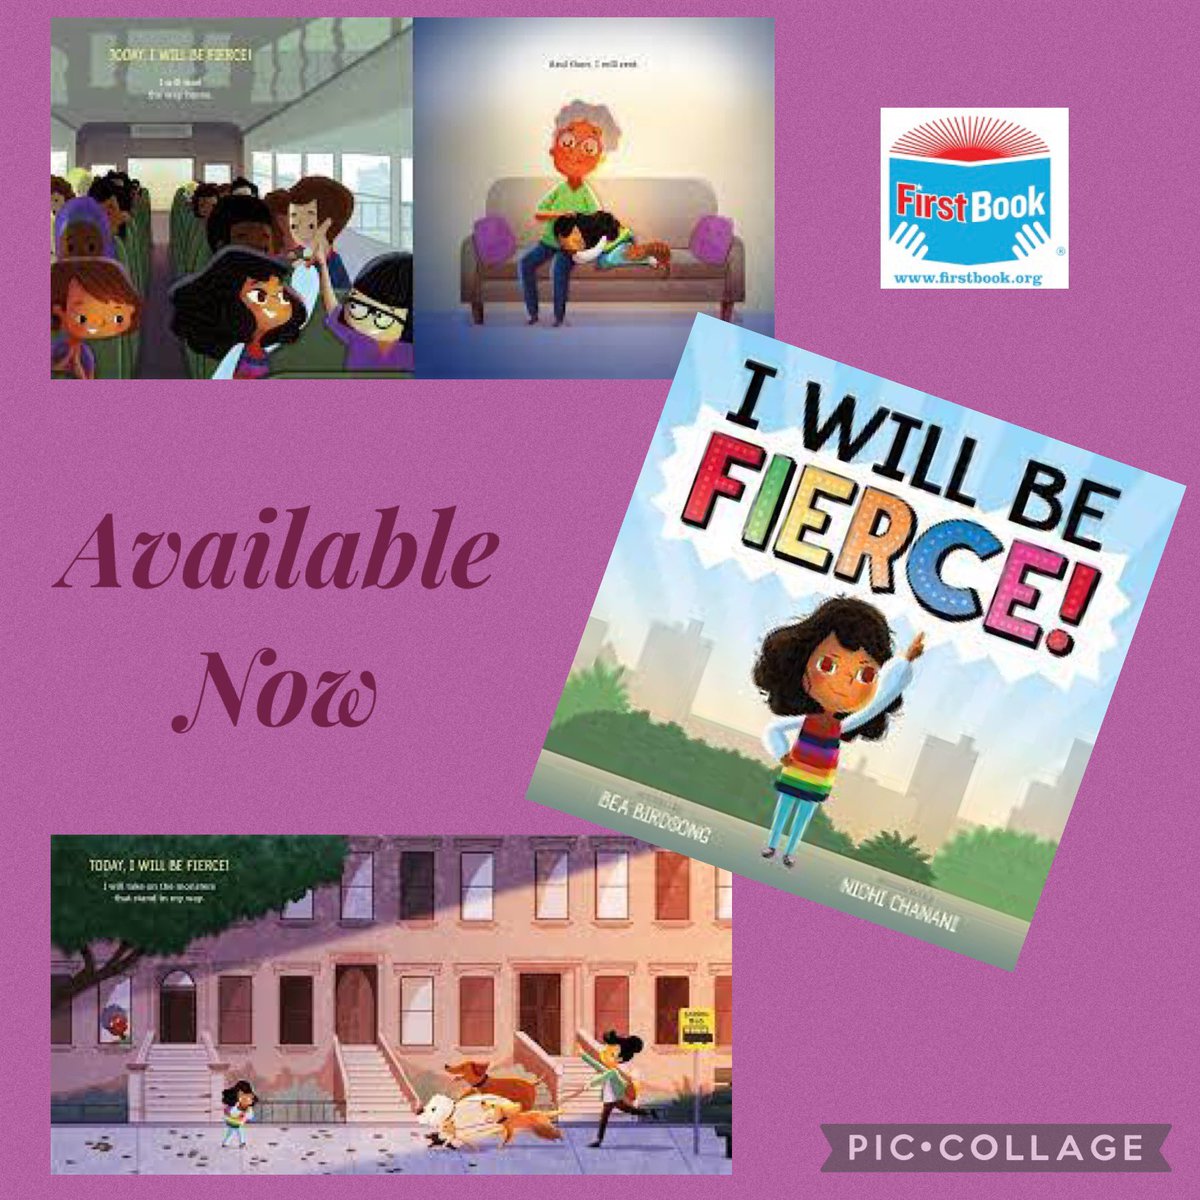 Beautifully illustrated declaration of a young girl as she tackles her school day-I WILL BE FIERCE! Perfect to encourage PK-gr 2 that they can be kind as well as tackle scary things. @BeaBirdsong @nidhiart Thx, @FirstBook, for this special edition at low cost for Title I schools